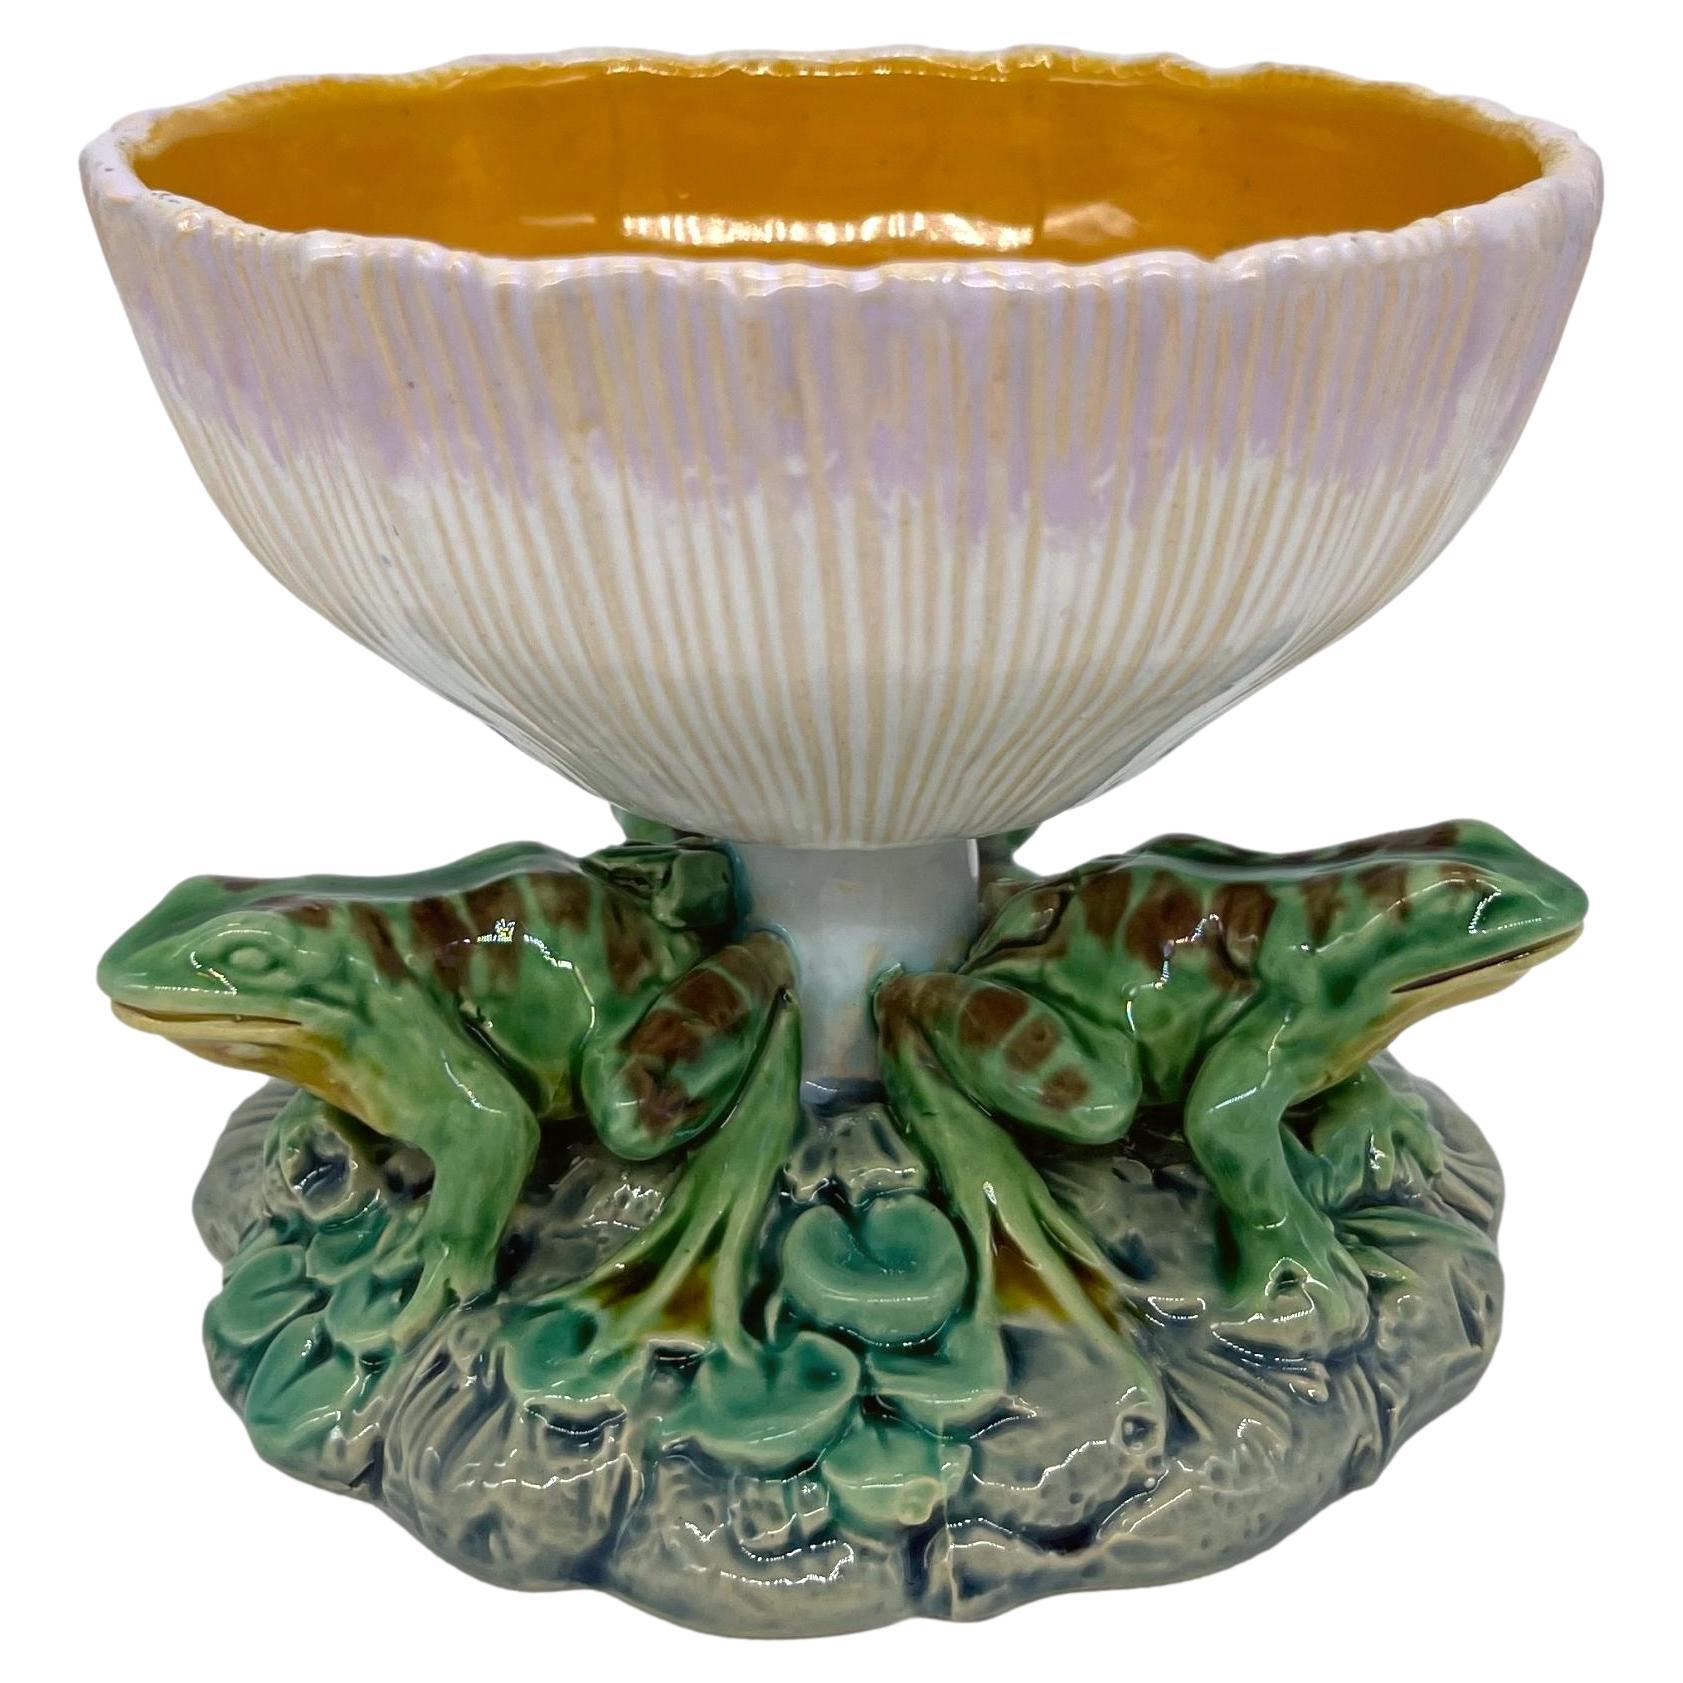 Minton Majolica Taza, molded as an inverted mushroom, the bowl interior glazed in orange, with three naturalistically modeled and glazed frogs around the stem, on a round, plant and rock-work base. Impressed marks to reverse: 'MINTON;' date cypher